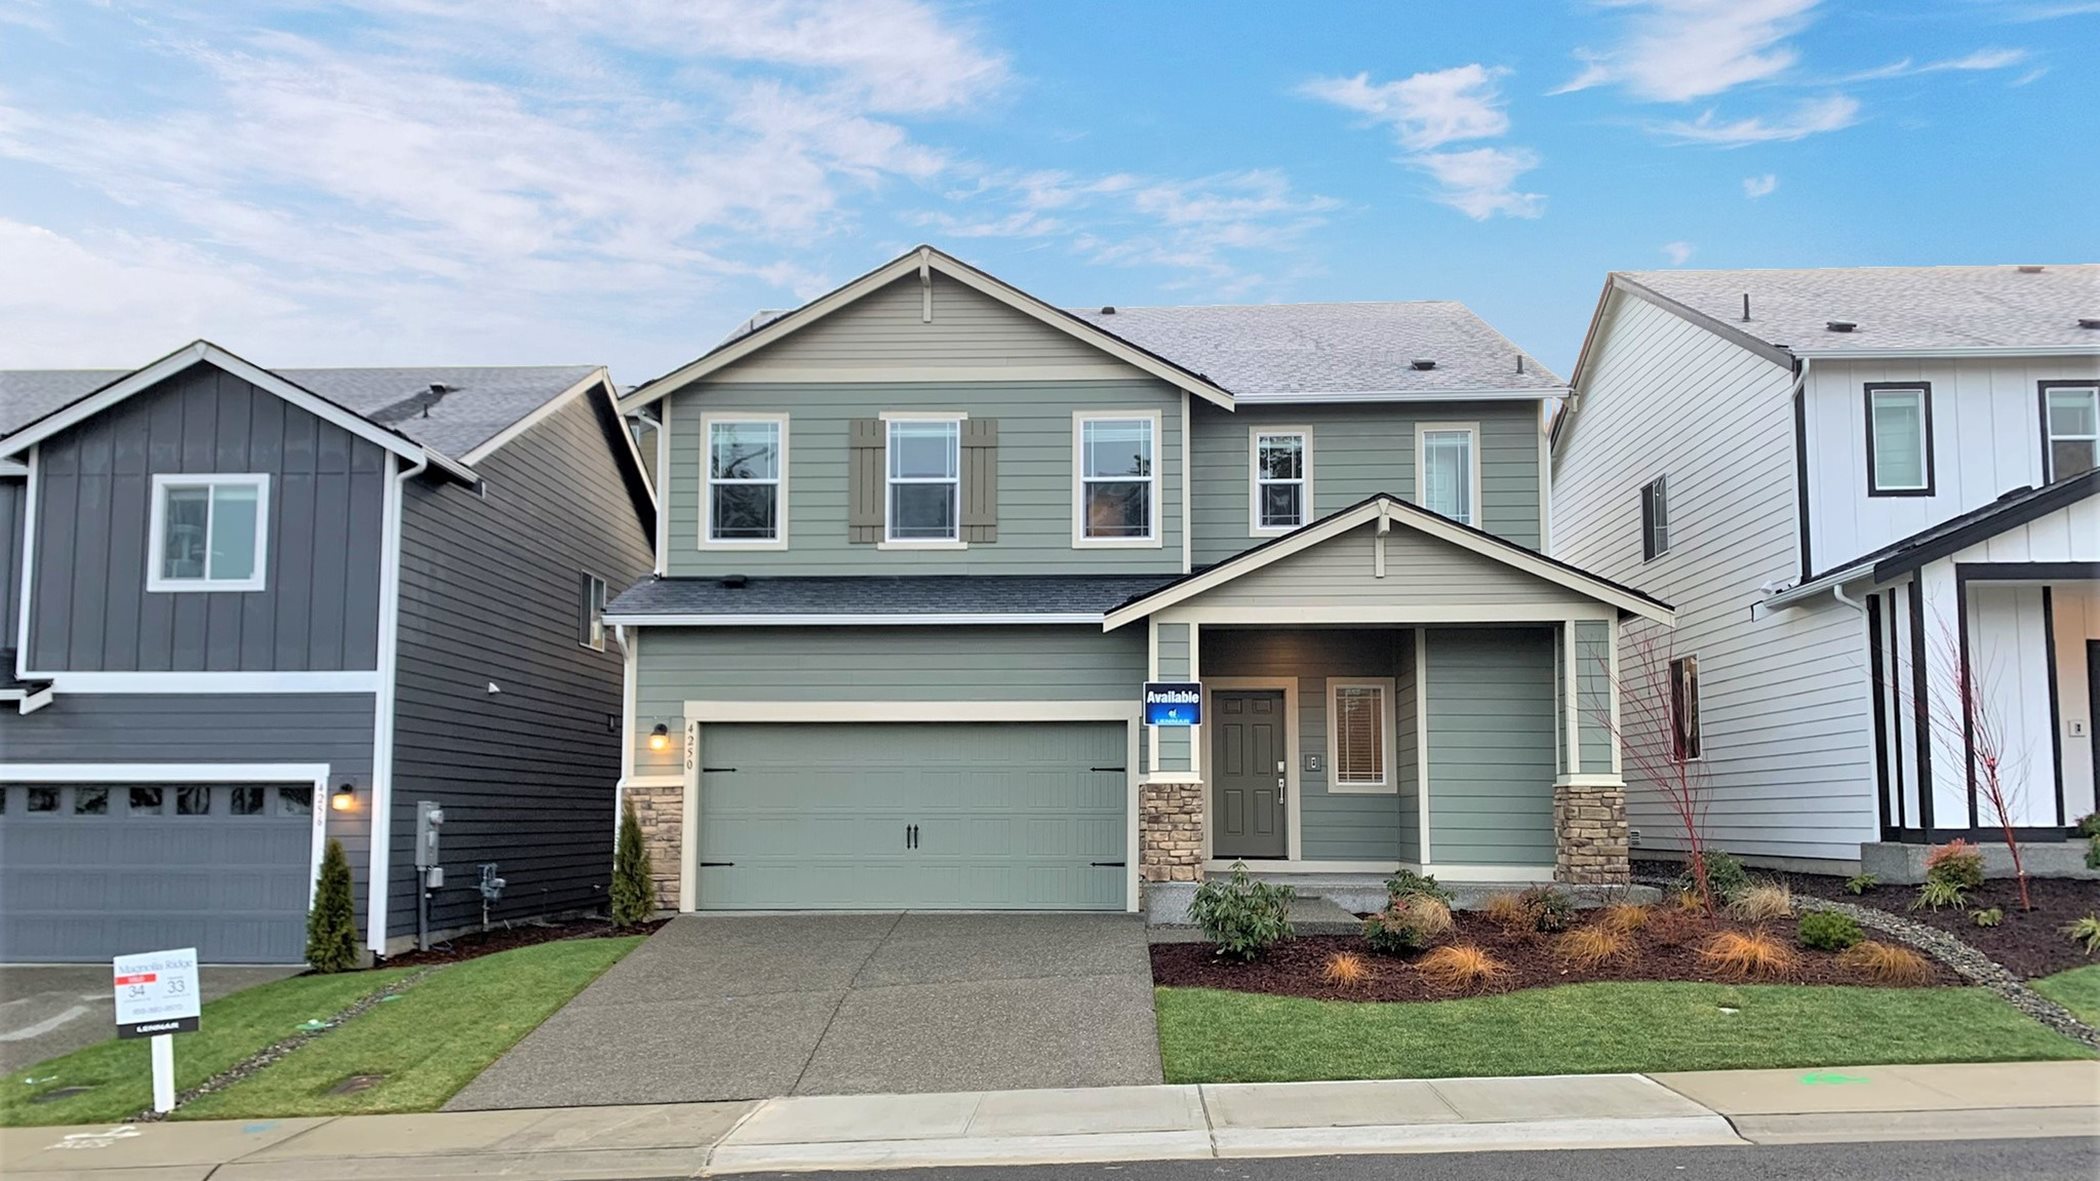 New homes for sale in Port Orchard WA